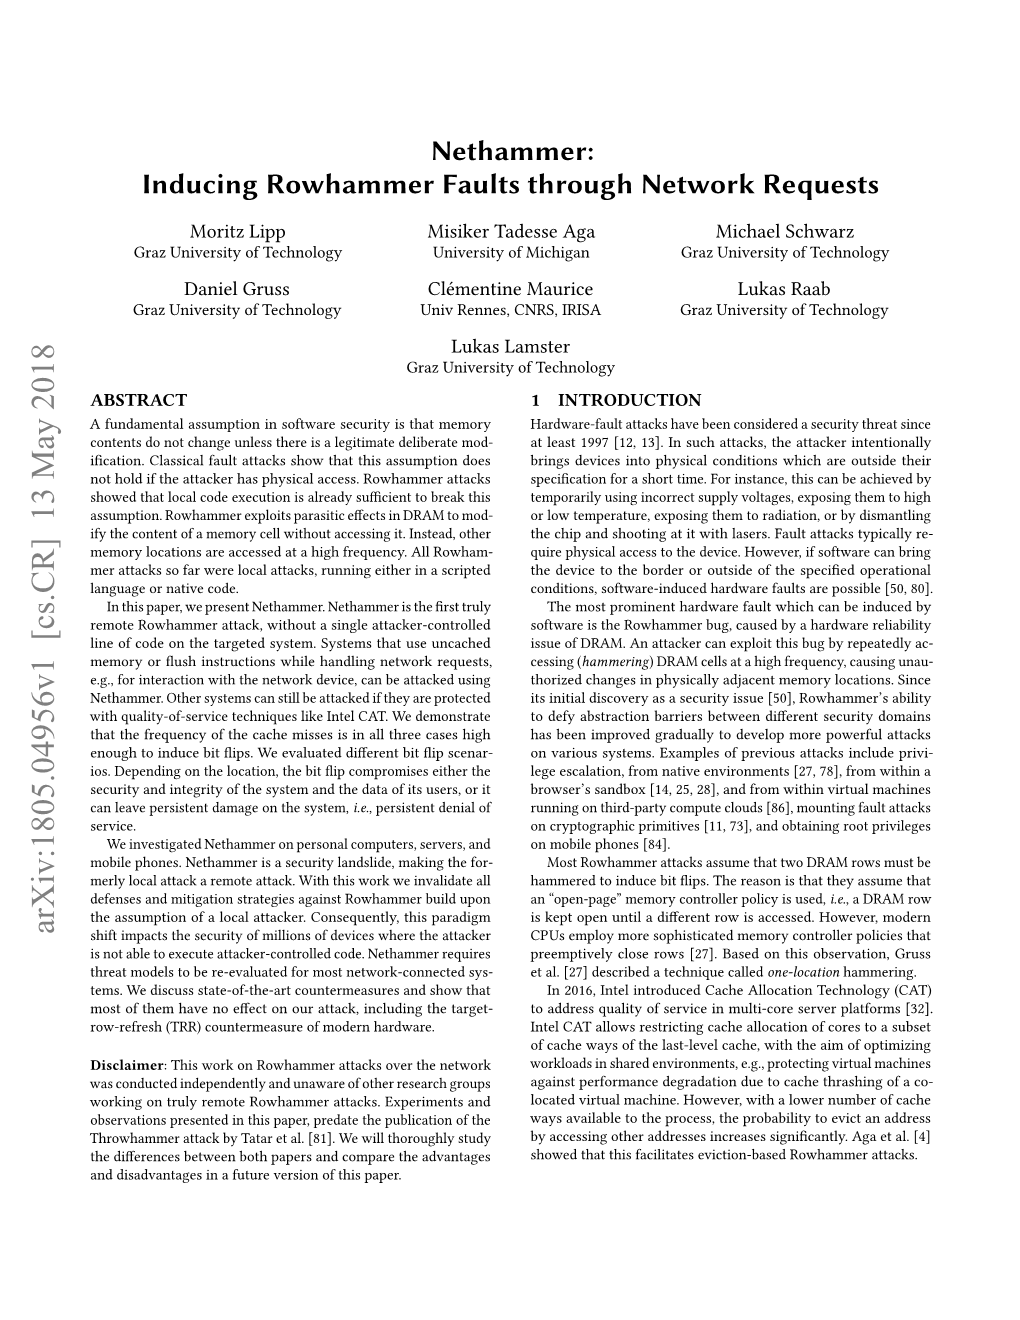 Nethammer: Inducing Rowhammer Faults Through Network Requests